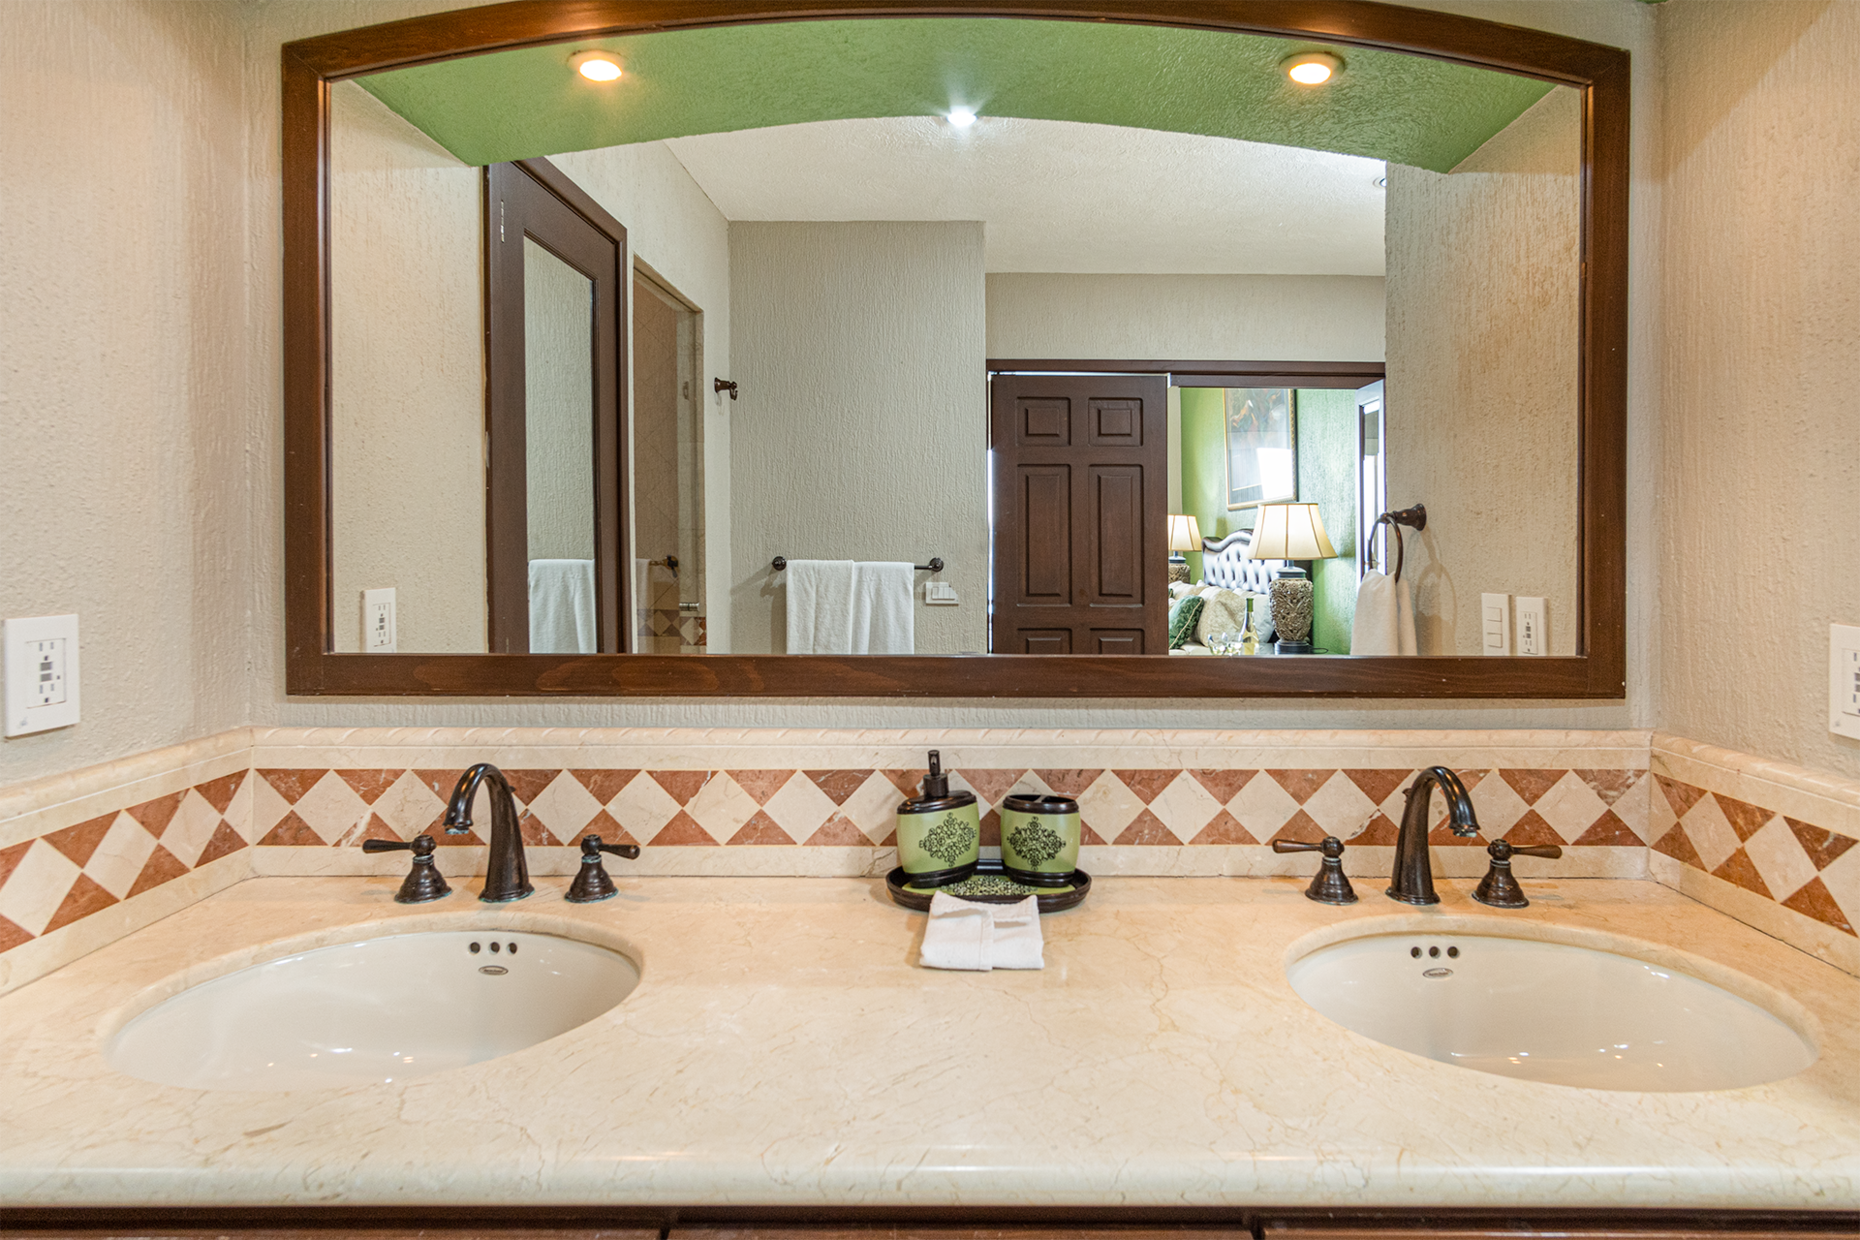 Vanity of the main bathroom with double sinks.